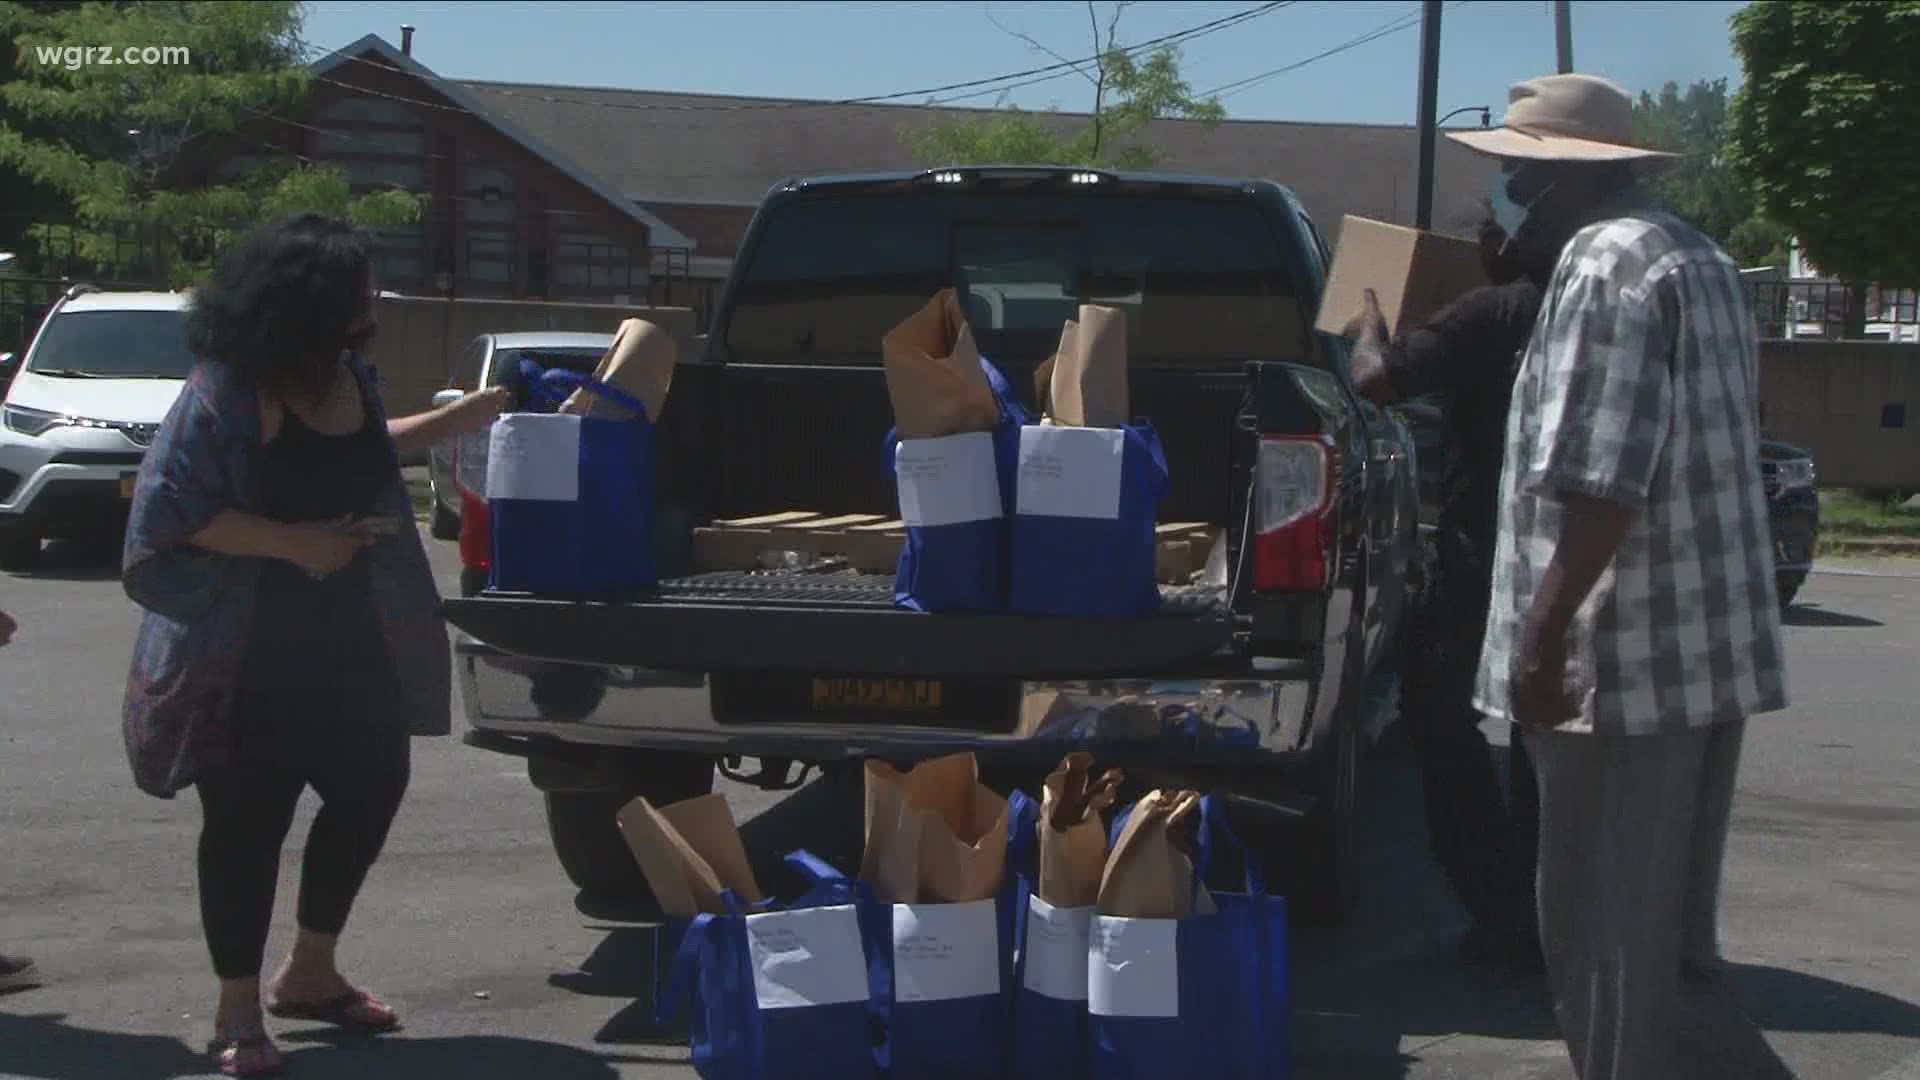 Lawmakers and officers with Buffalo Police today were handing out food for people who need it at the C District police station on East Ferry.